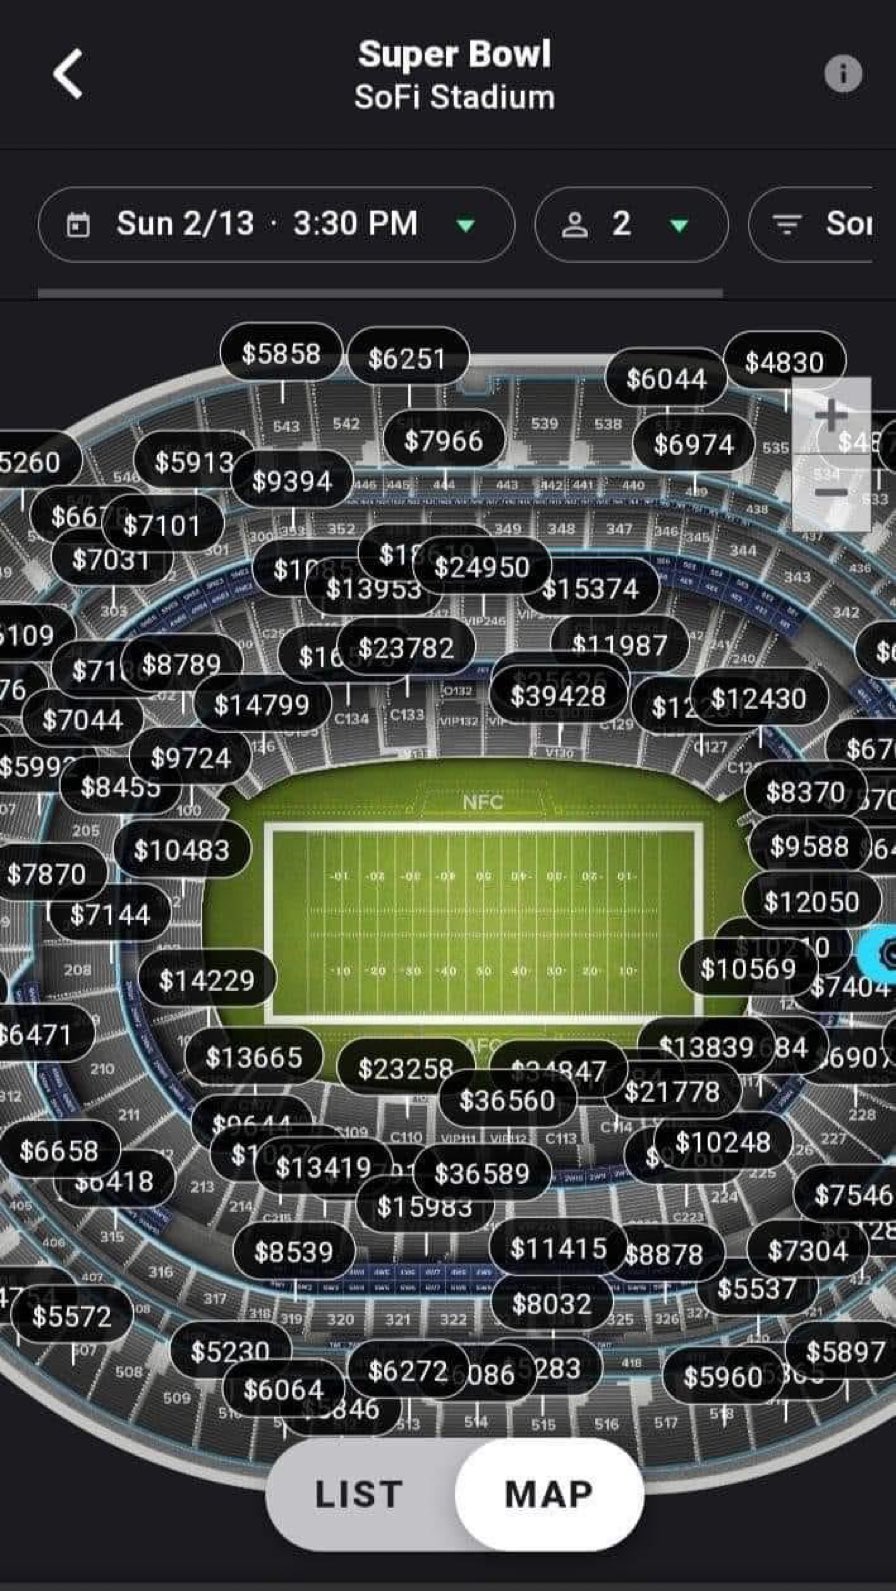 super bowl ticket prices this year